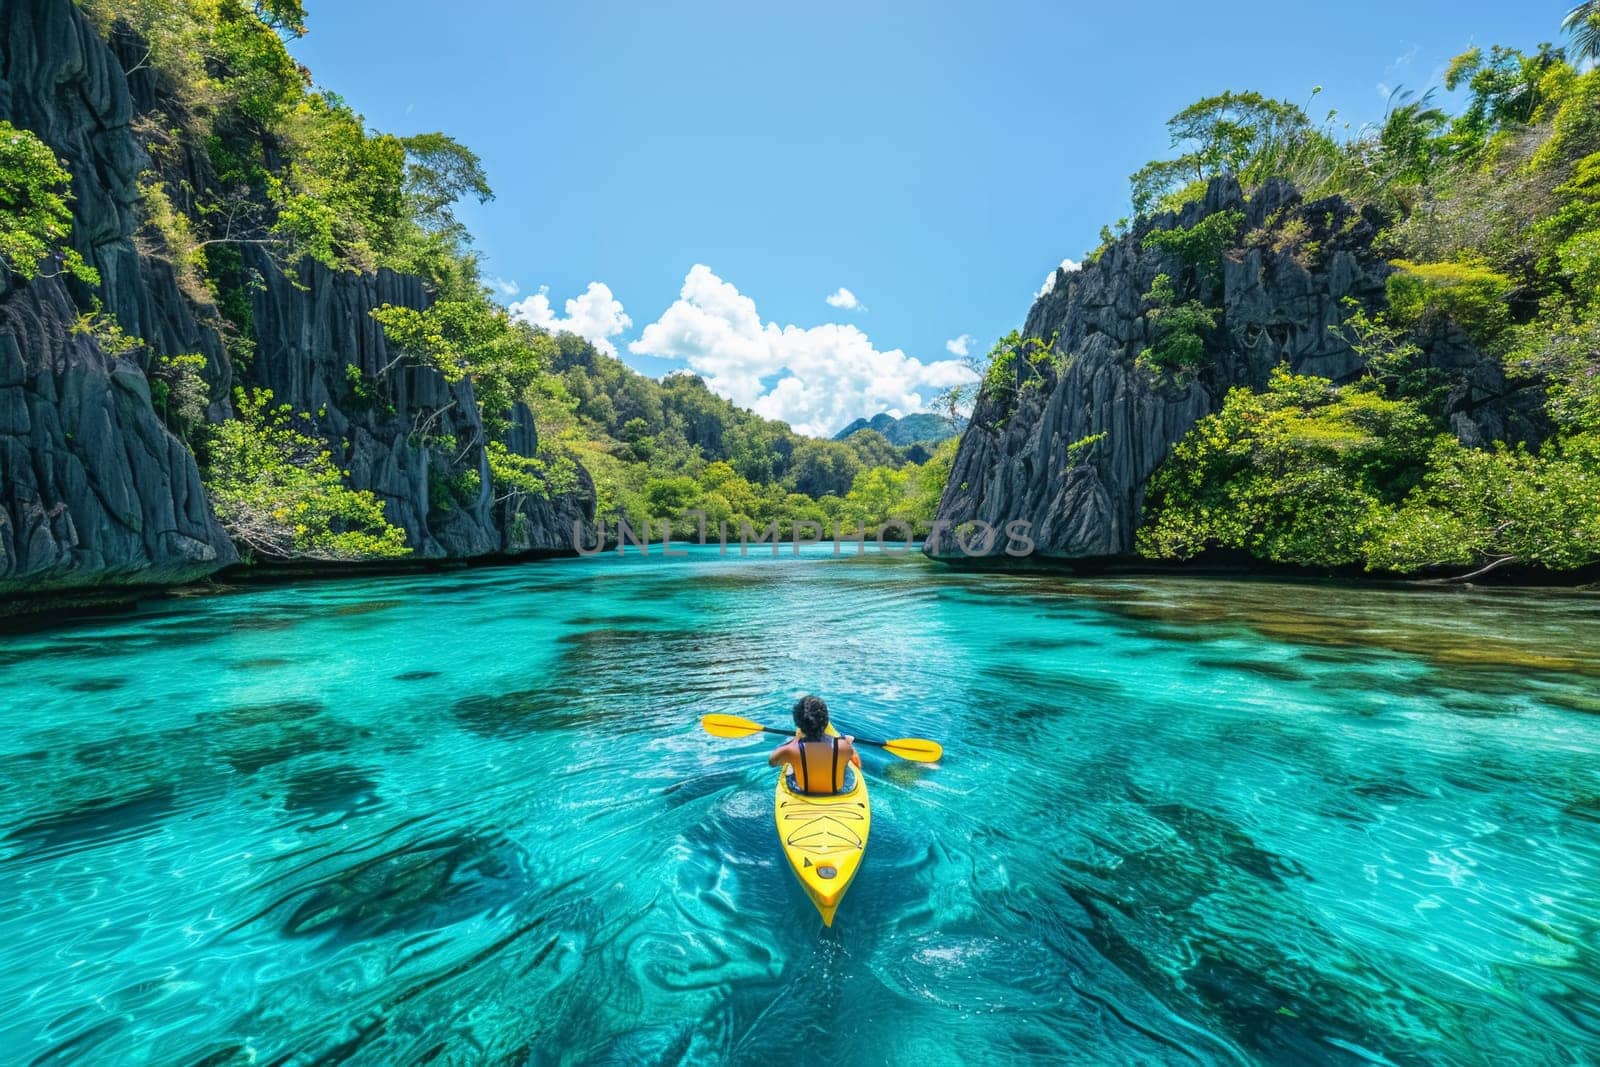 A vibrant kayak slices through the azure waters of a lagoon, surrounded by lush greenery and towering cliffs, an adventure in paradise.